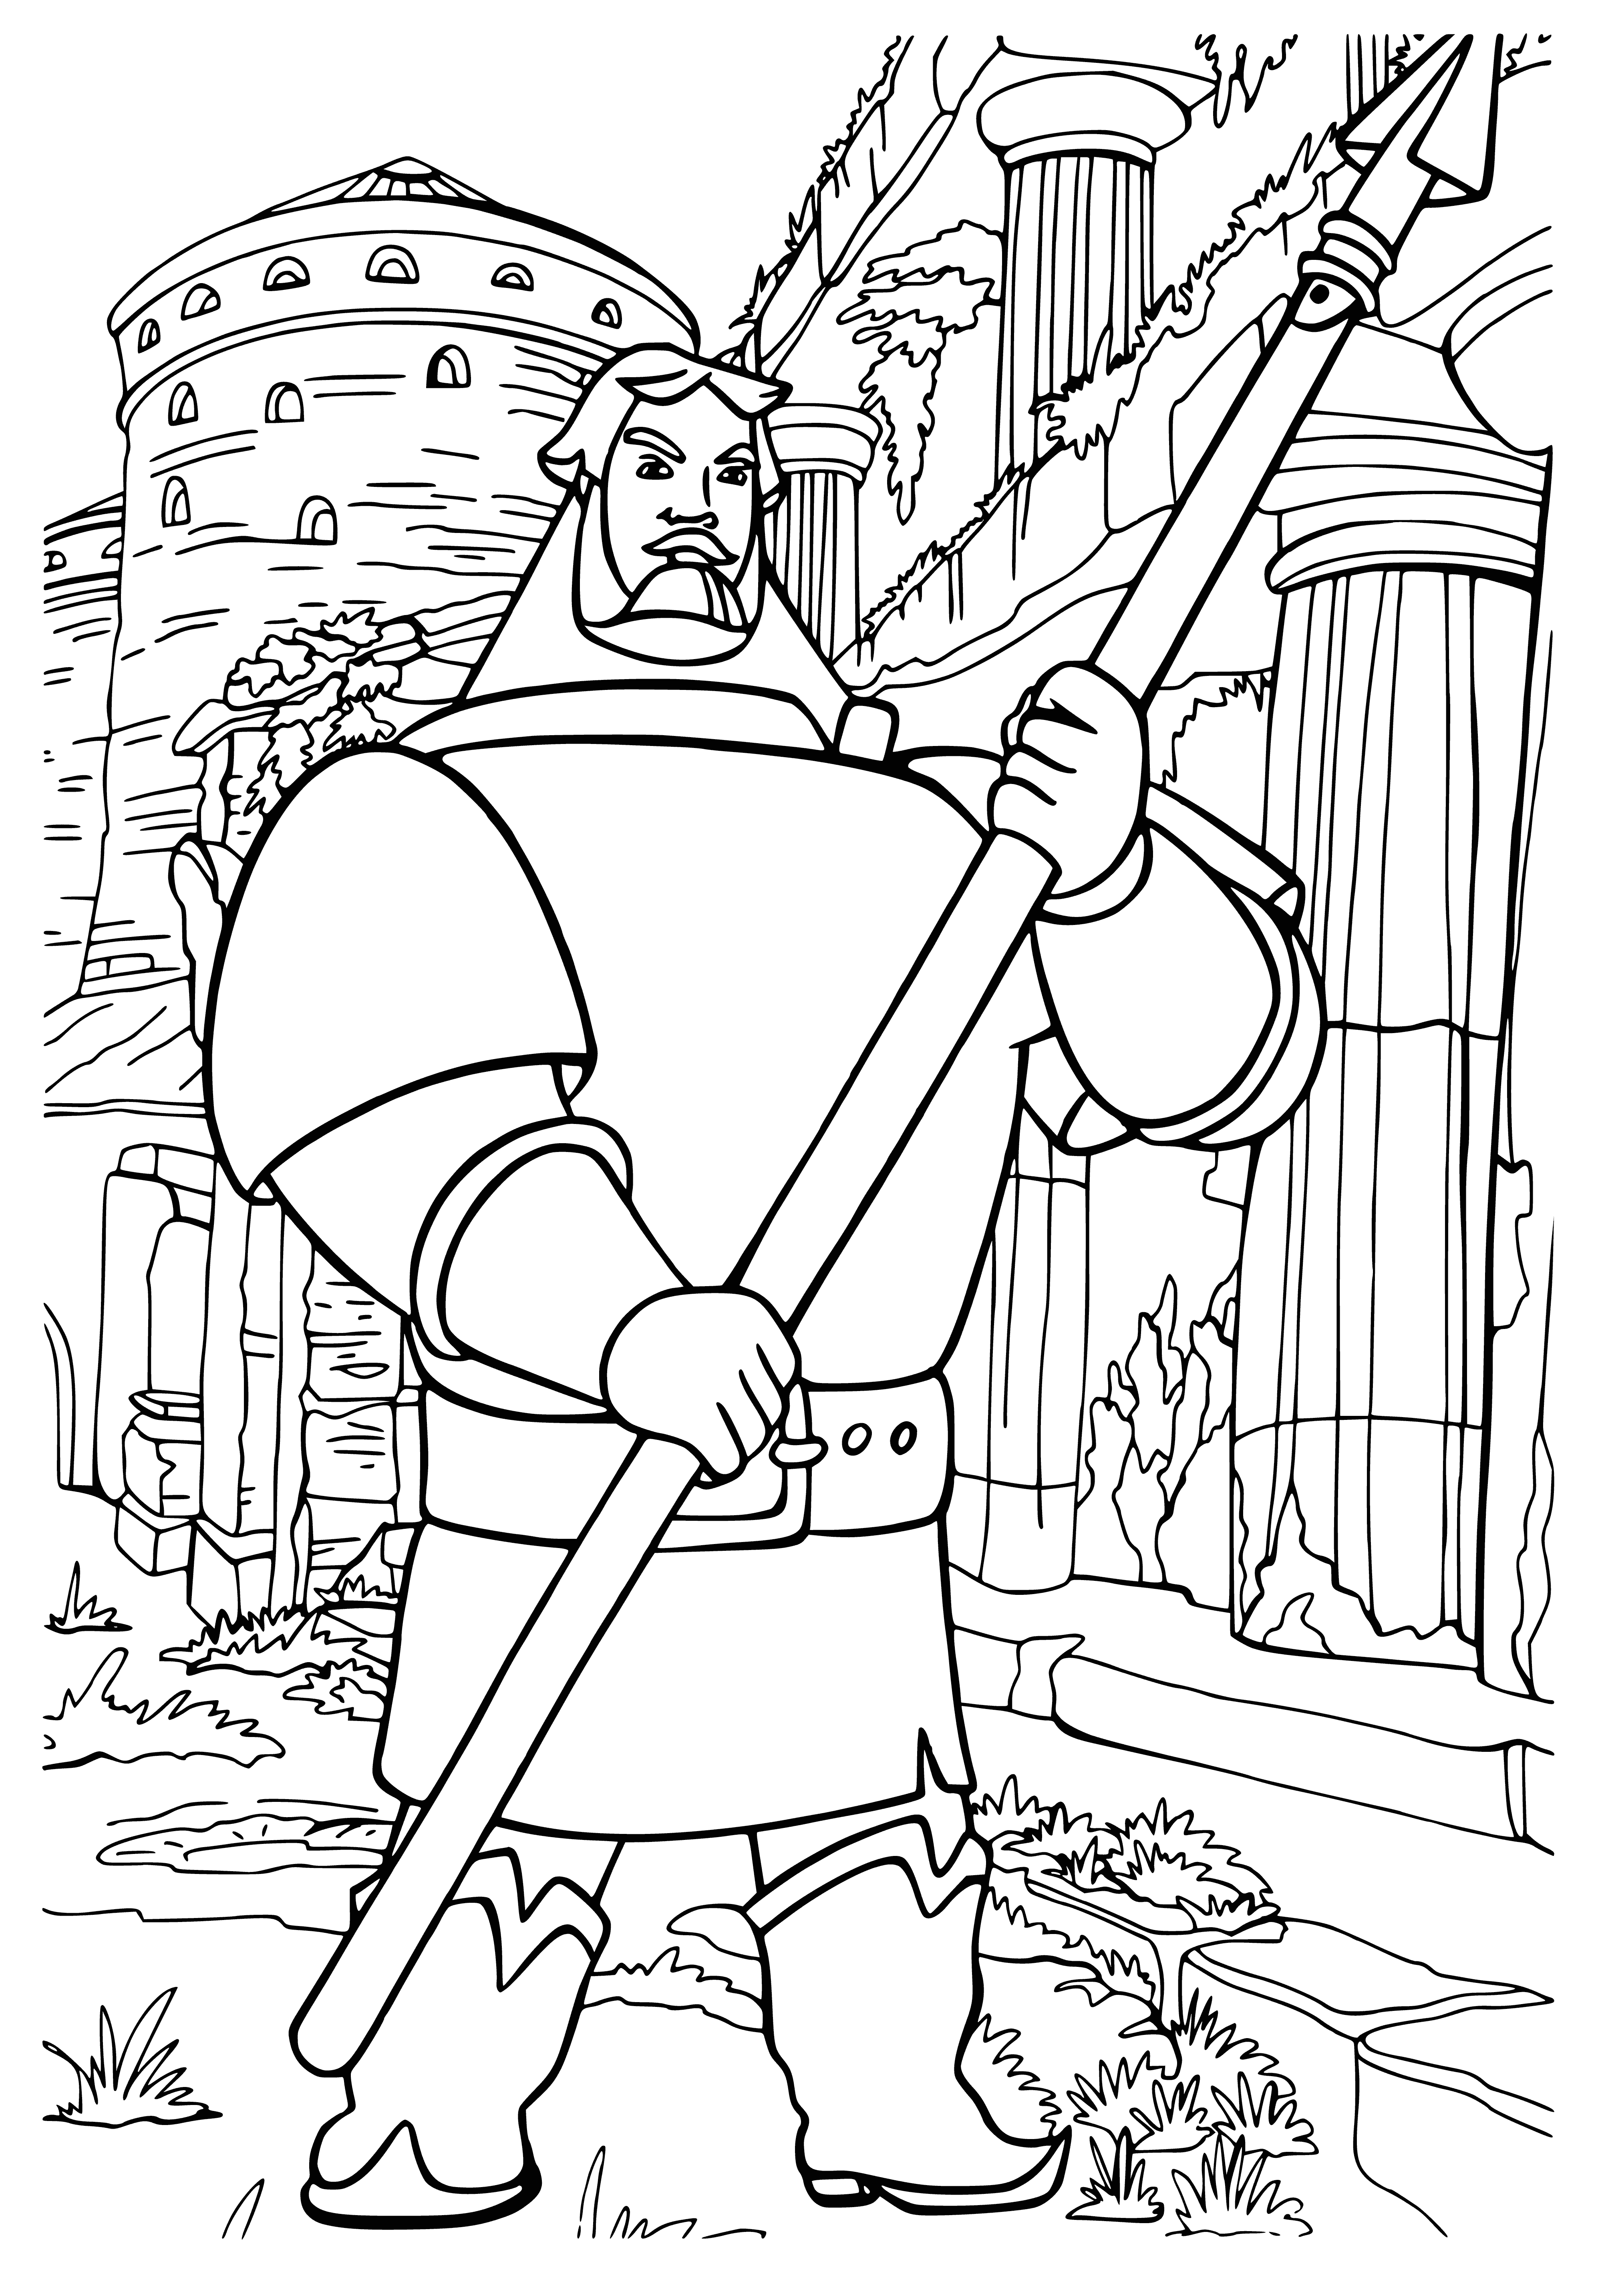 coloring page: Ilya Muromets is a large, armored warrior w/sword; Night Robber is small & lithe w/scarf-covered face, dagger & sack - their determined eyes pierce the viewer.